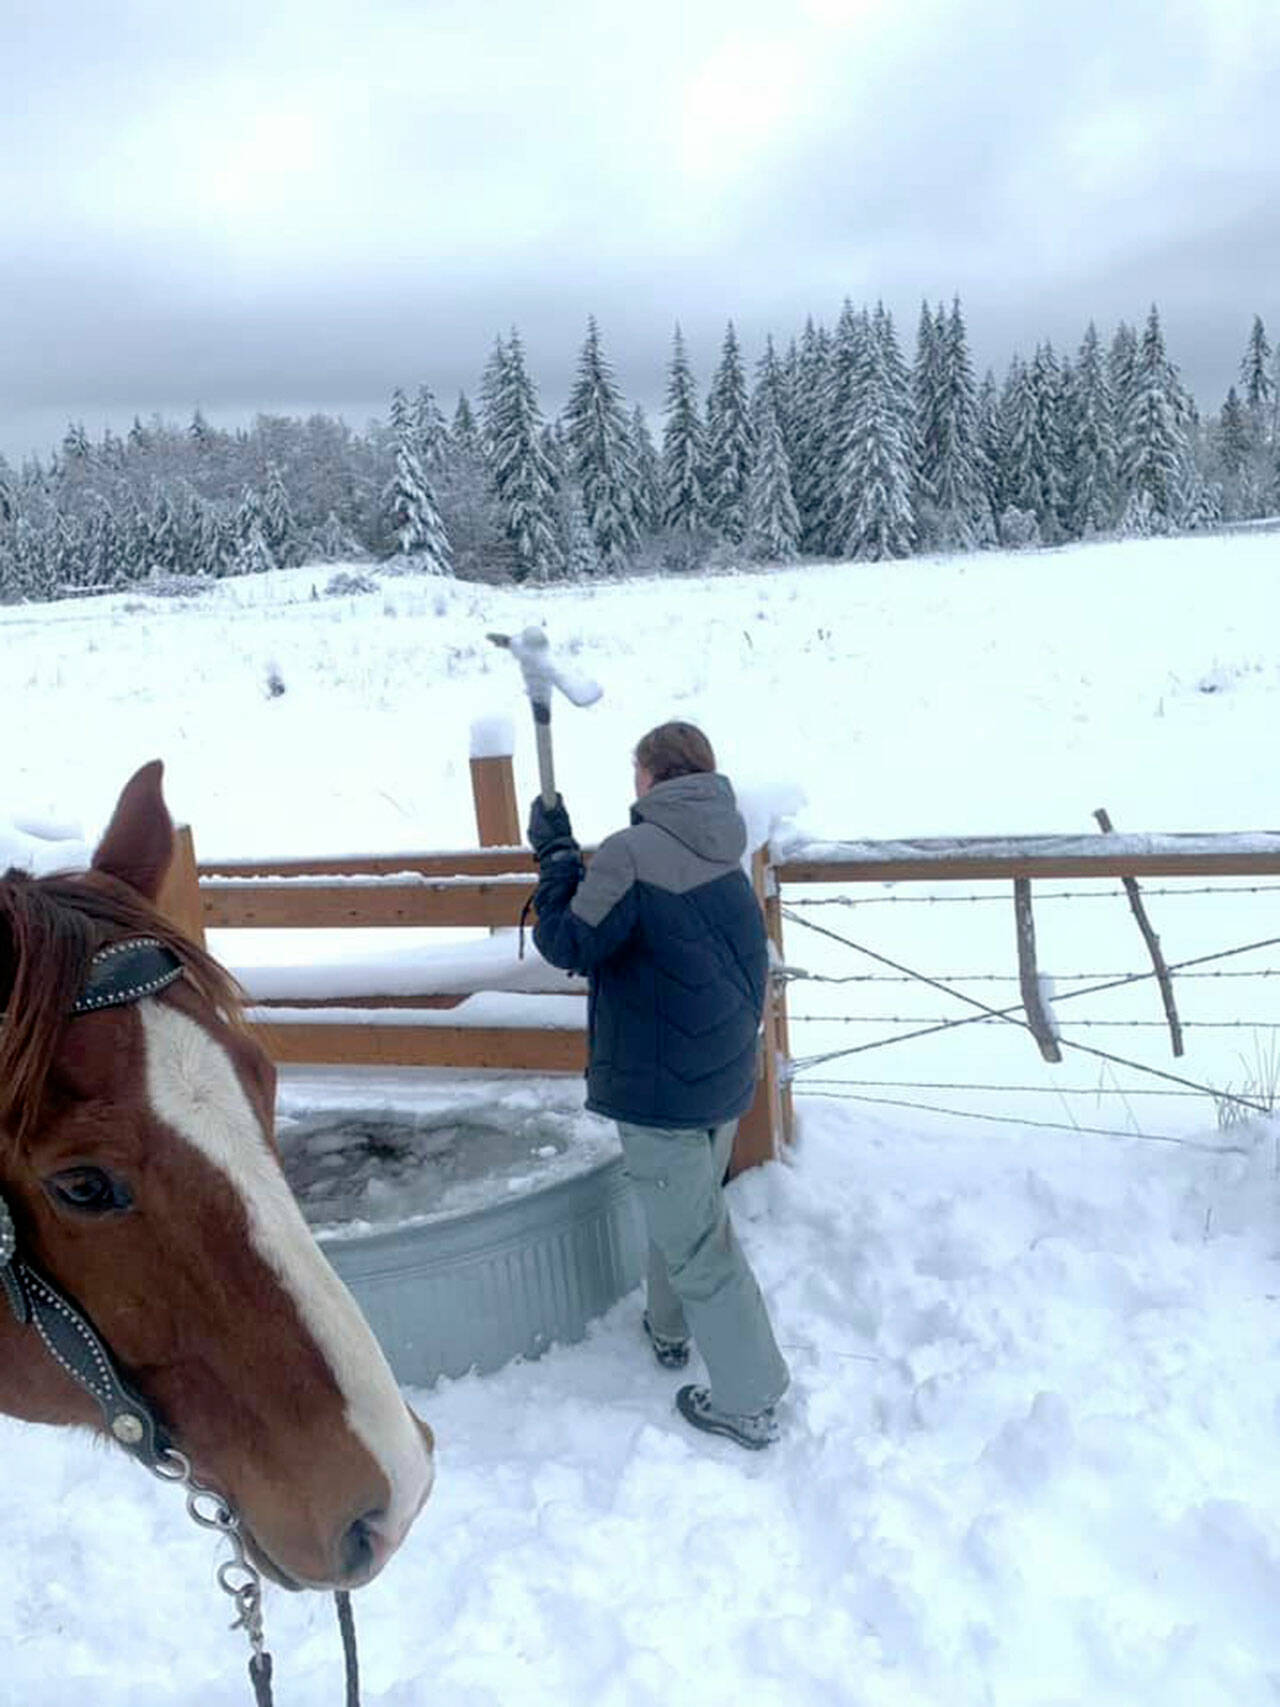 Lillian Bond uses a pick axe to break through the top layer of ice in her horse’s water trough. Having access to drinking water is vital to an animal’s health. (Courtesy of Jennifer Bond)